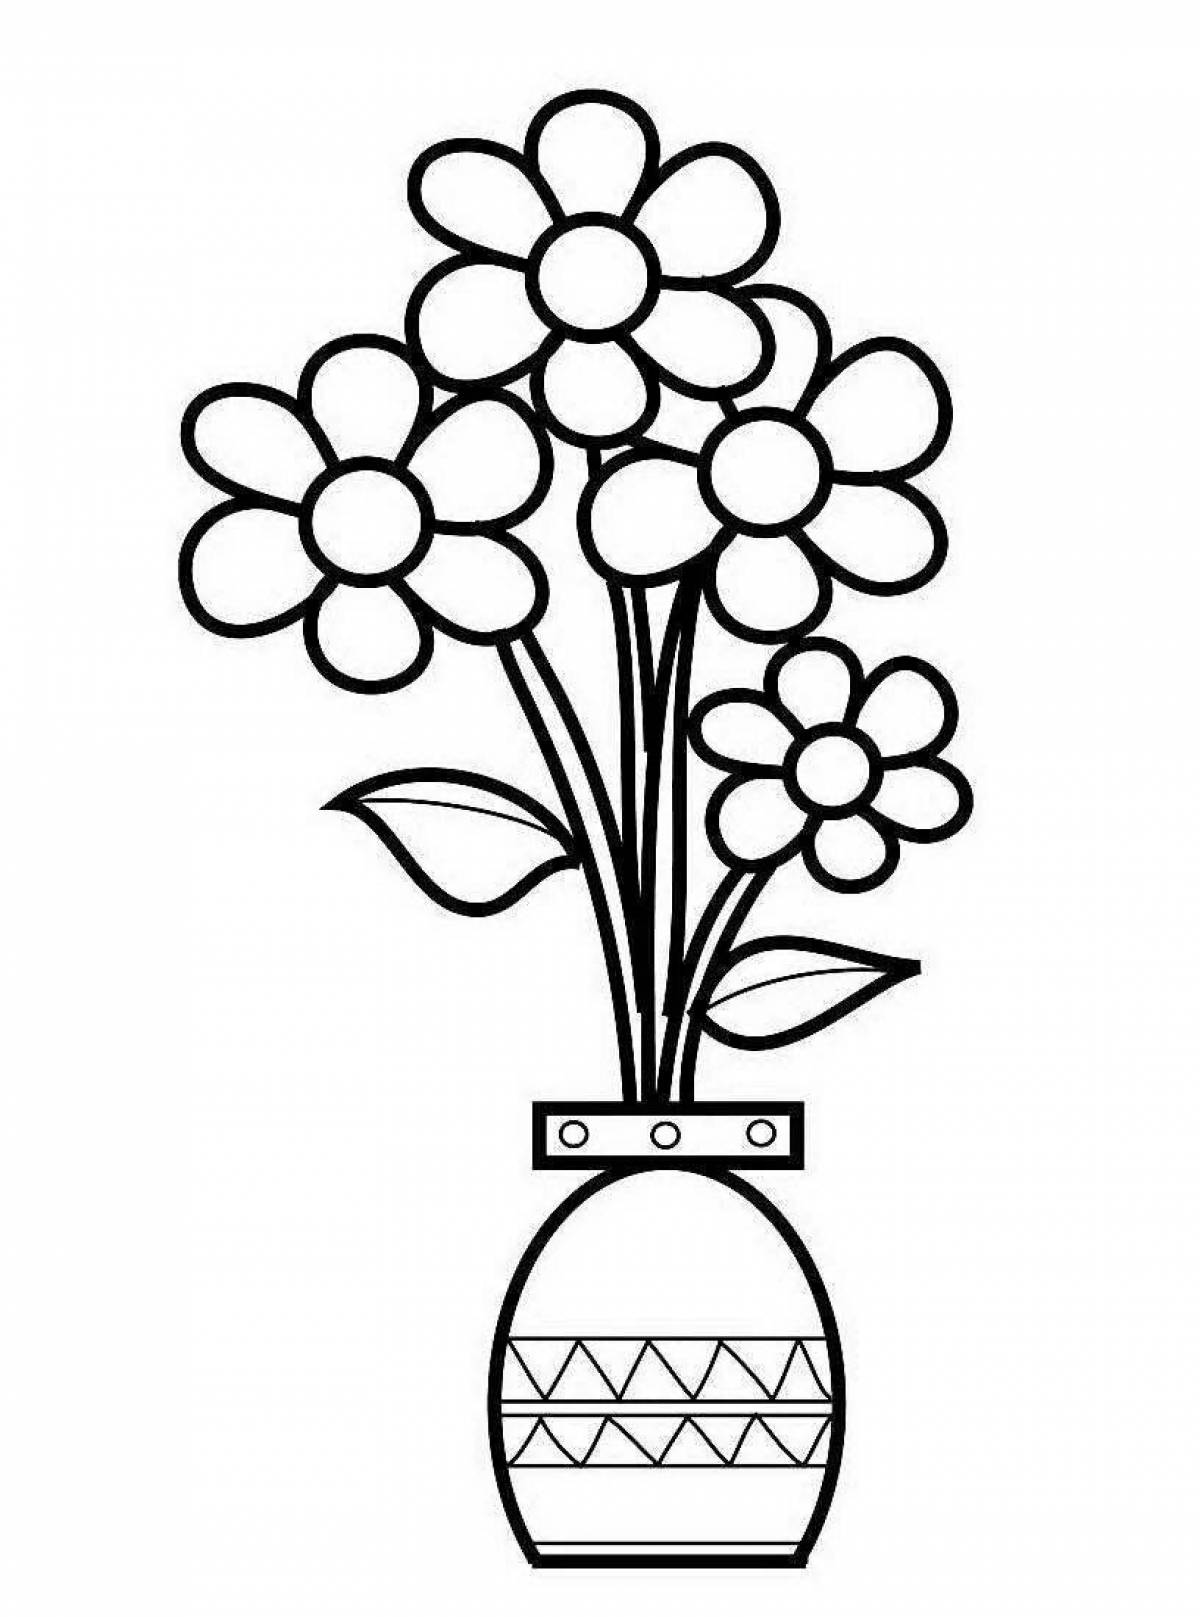 Great coloring flower in a vase